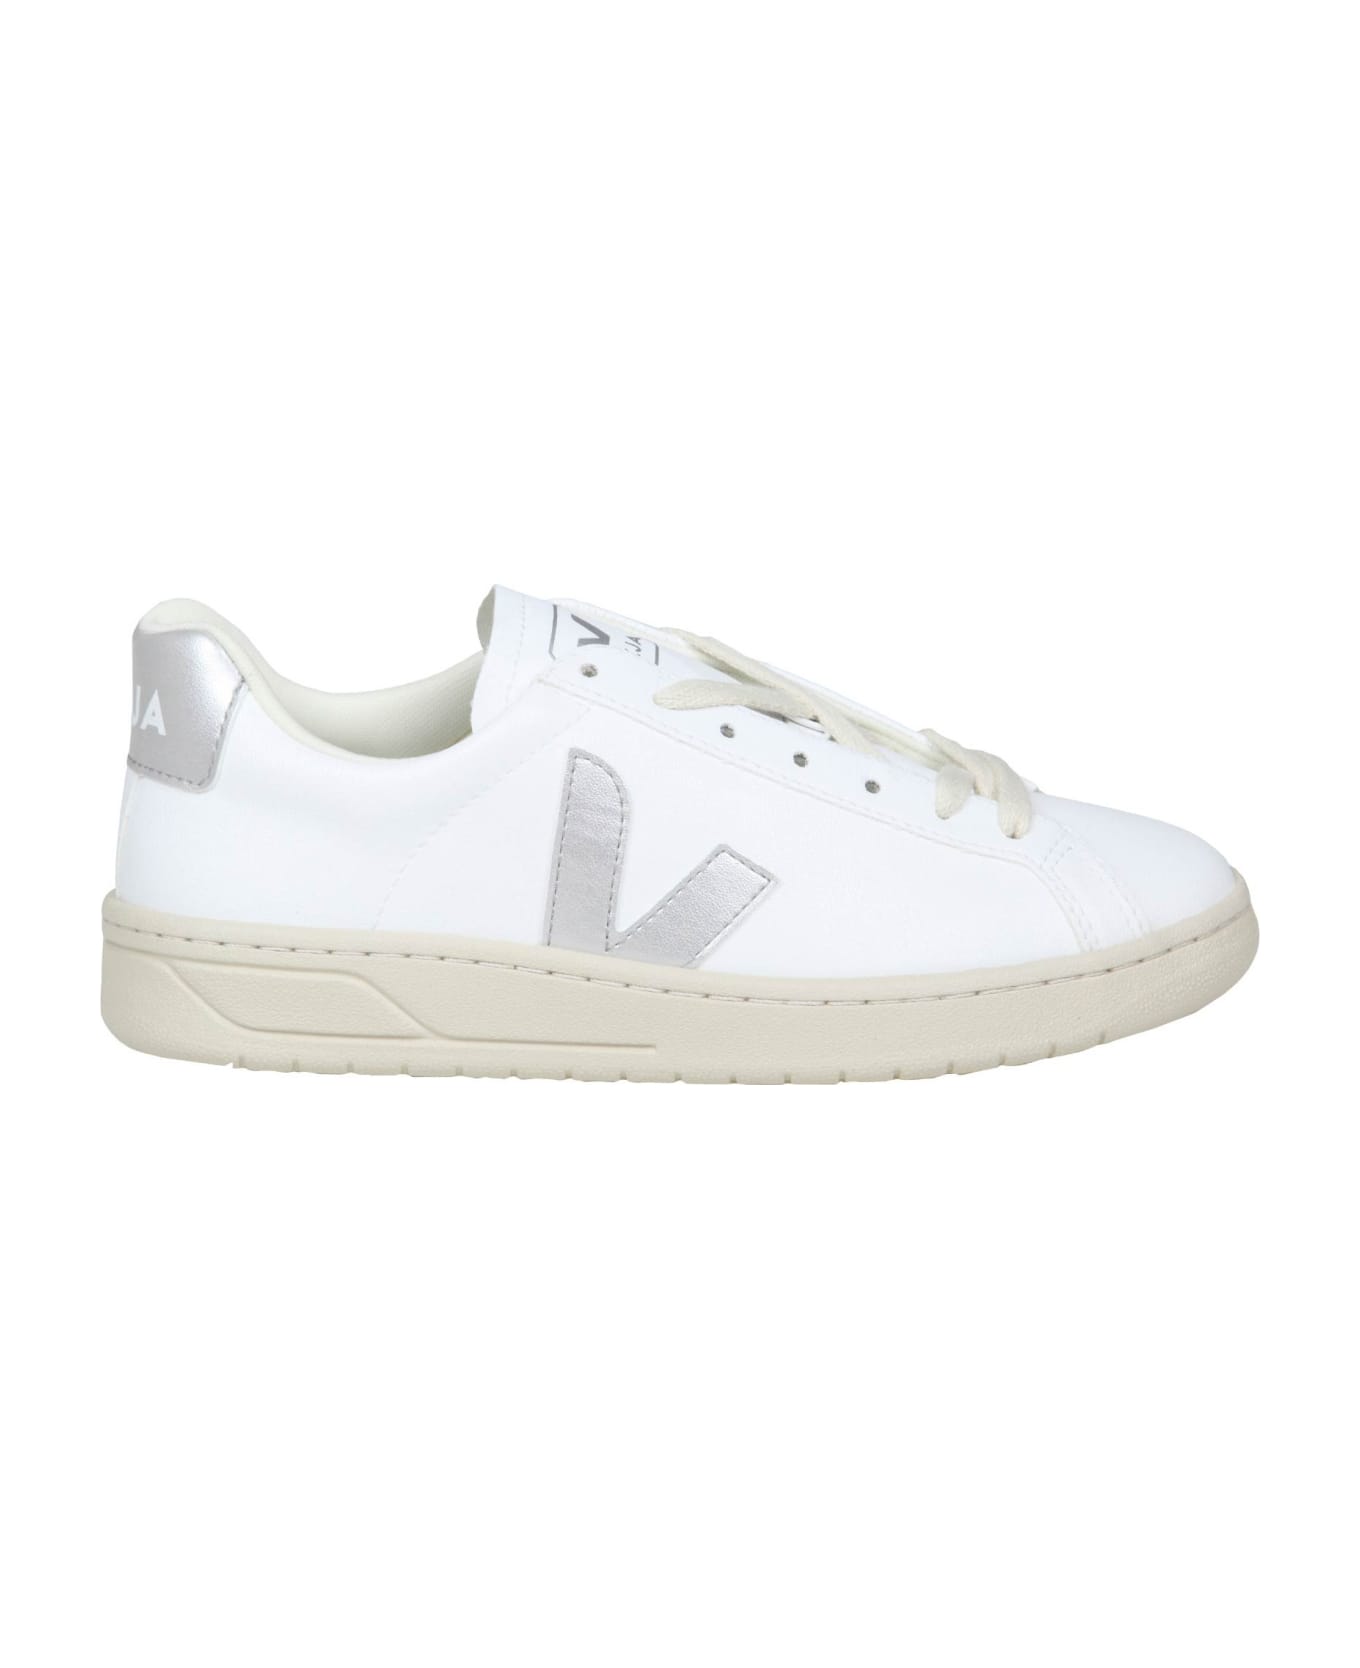 Veja Urca Sneakers In White And Silver Leather - White/Silver